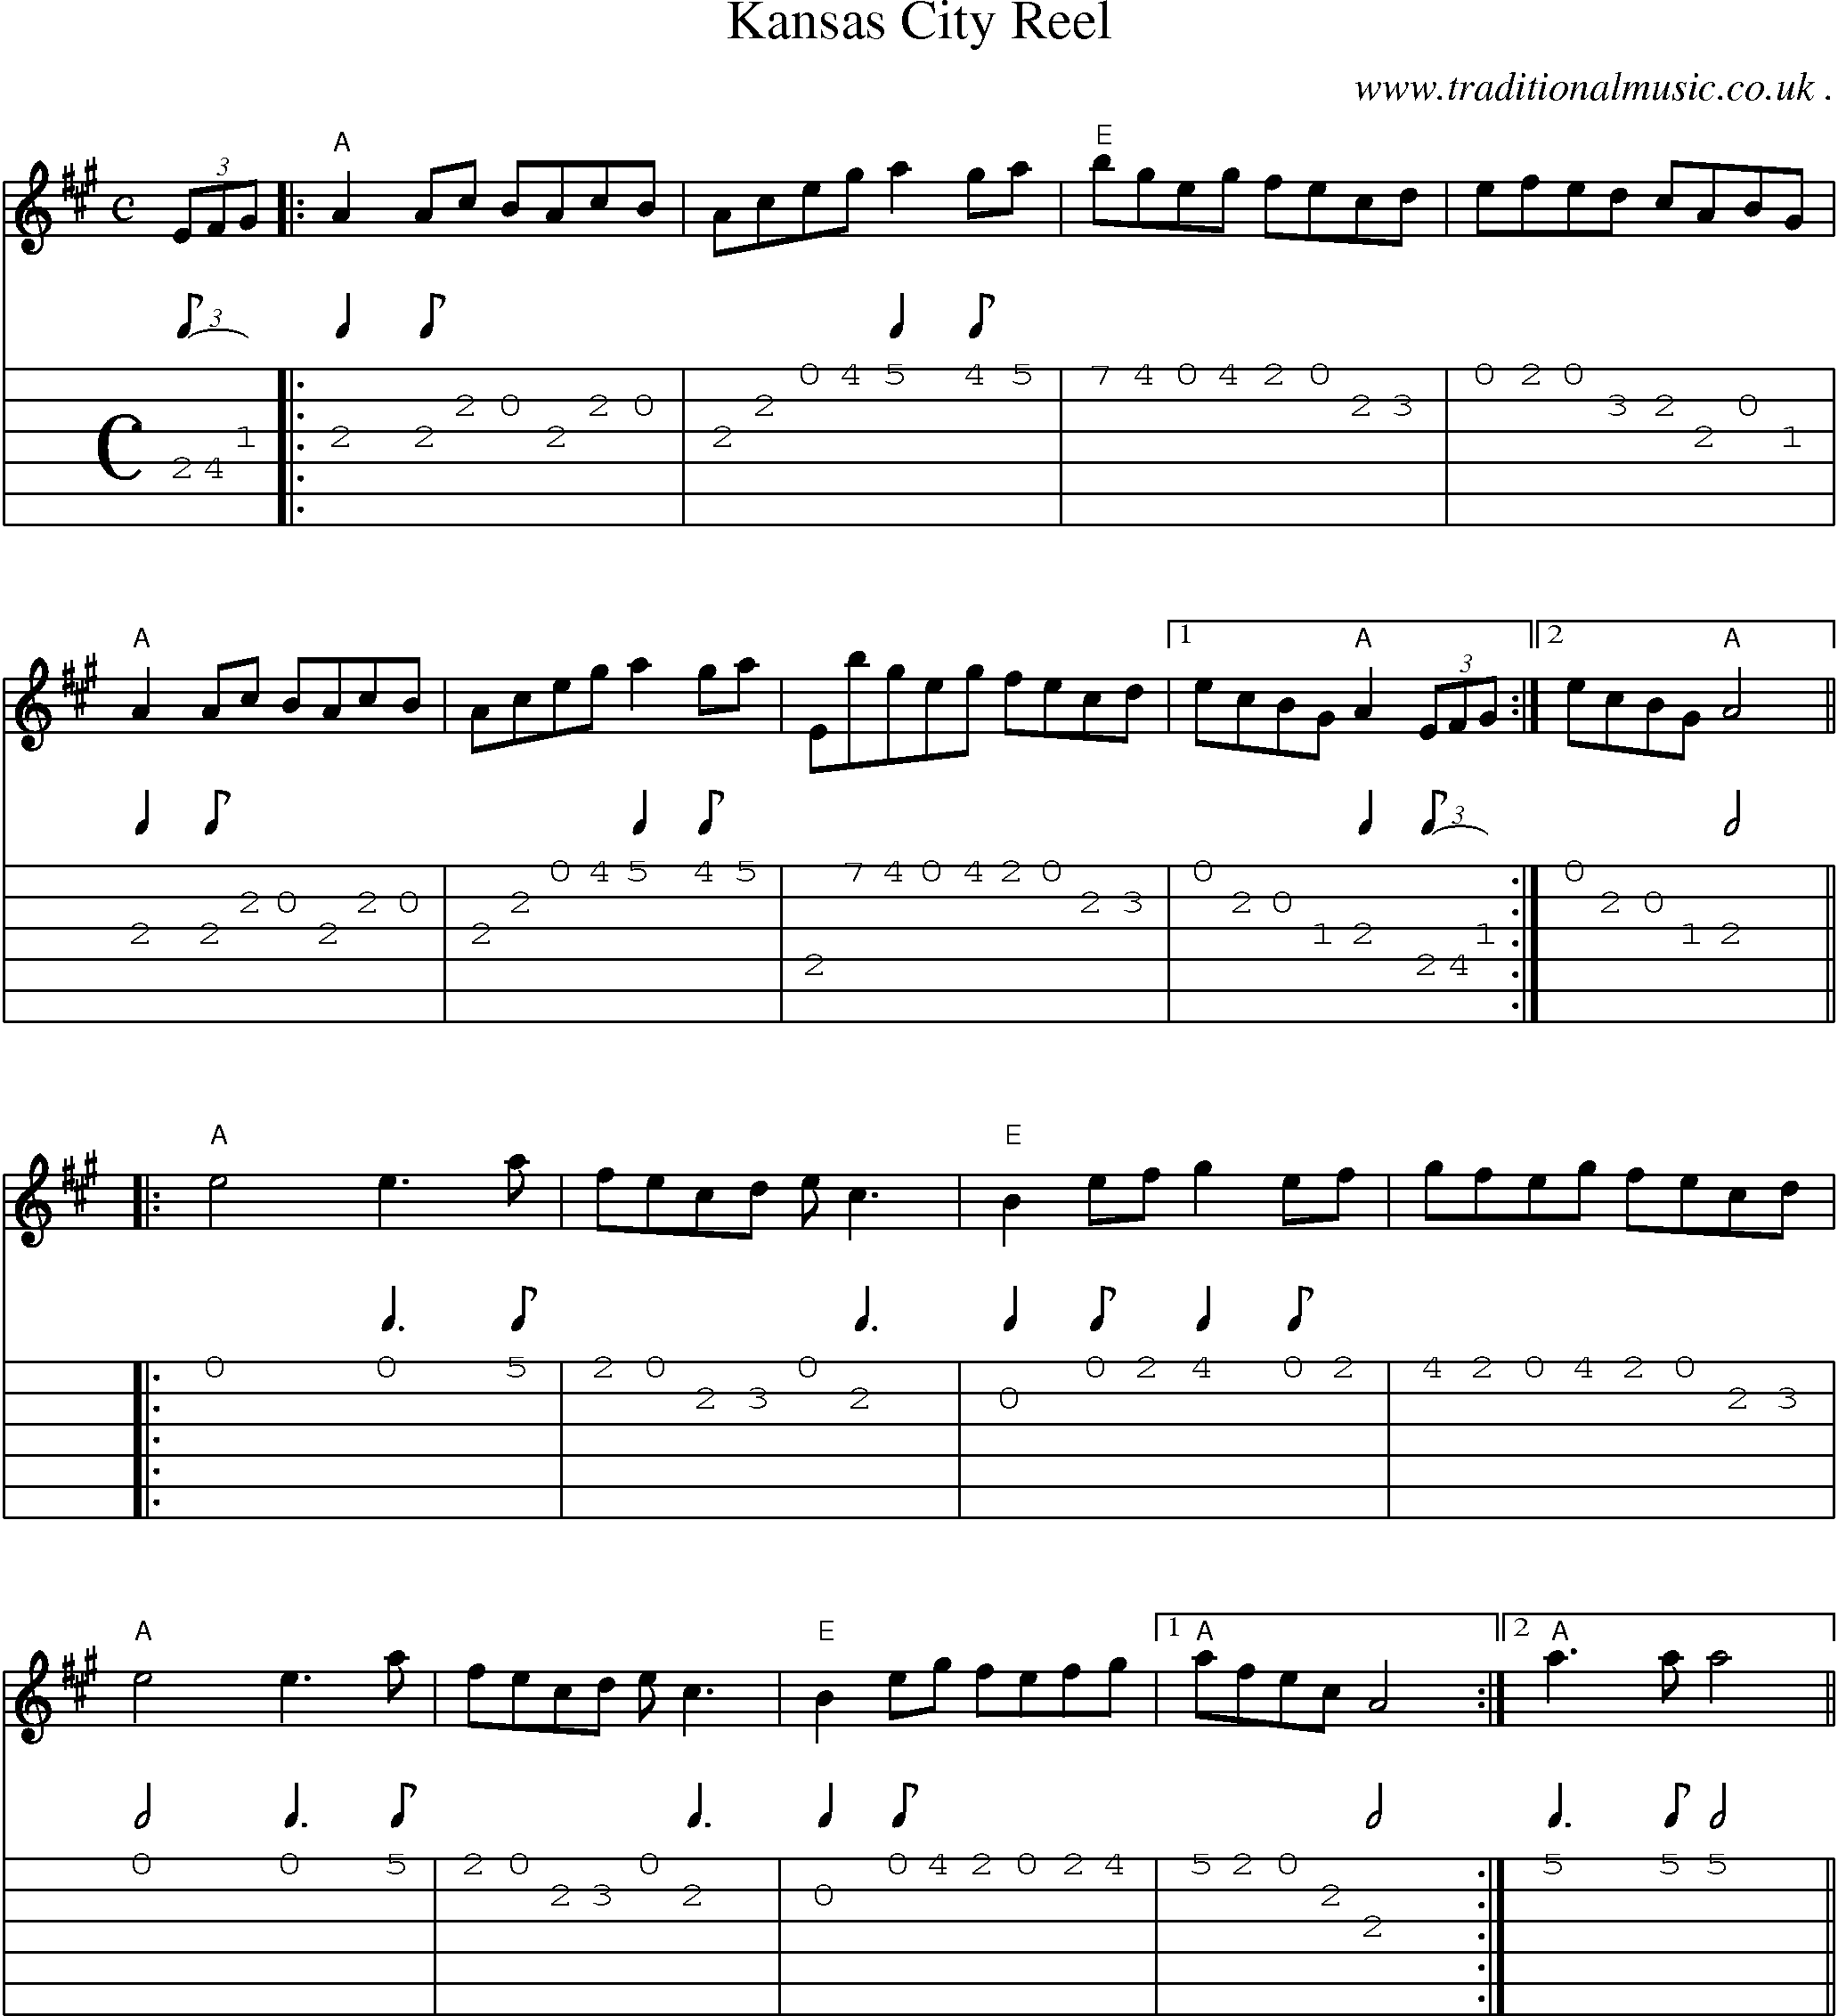 Music Score and Guitar Tabs for Kansas City Reel